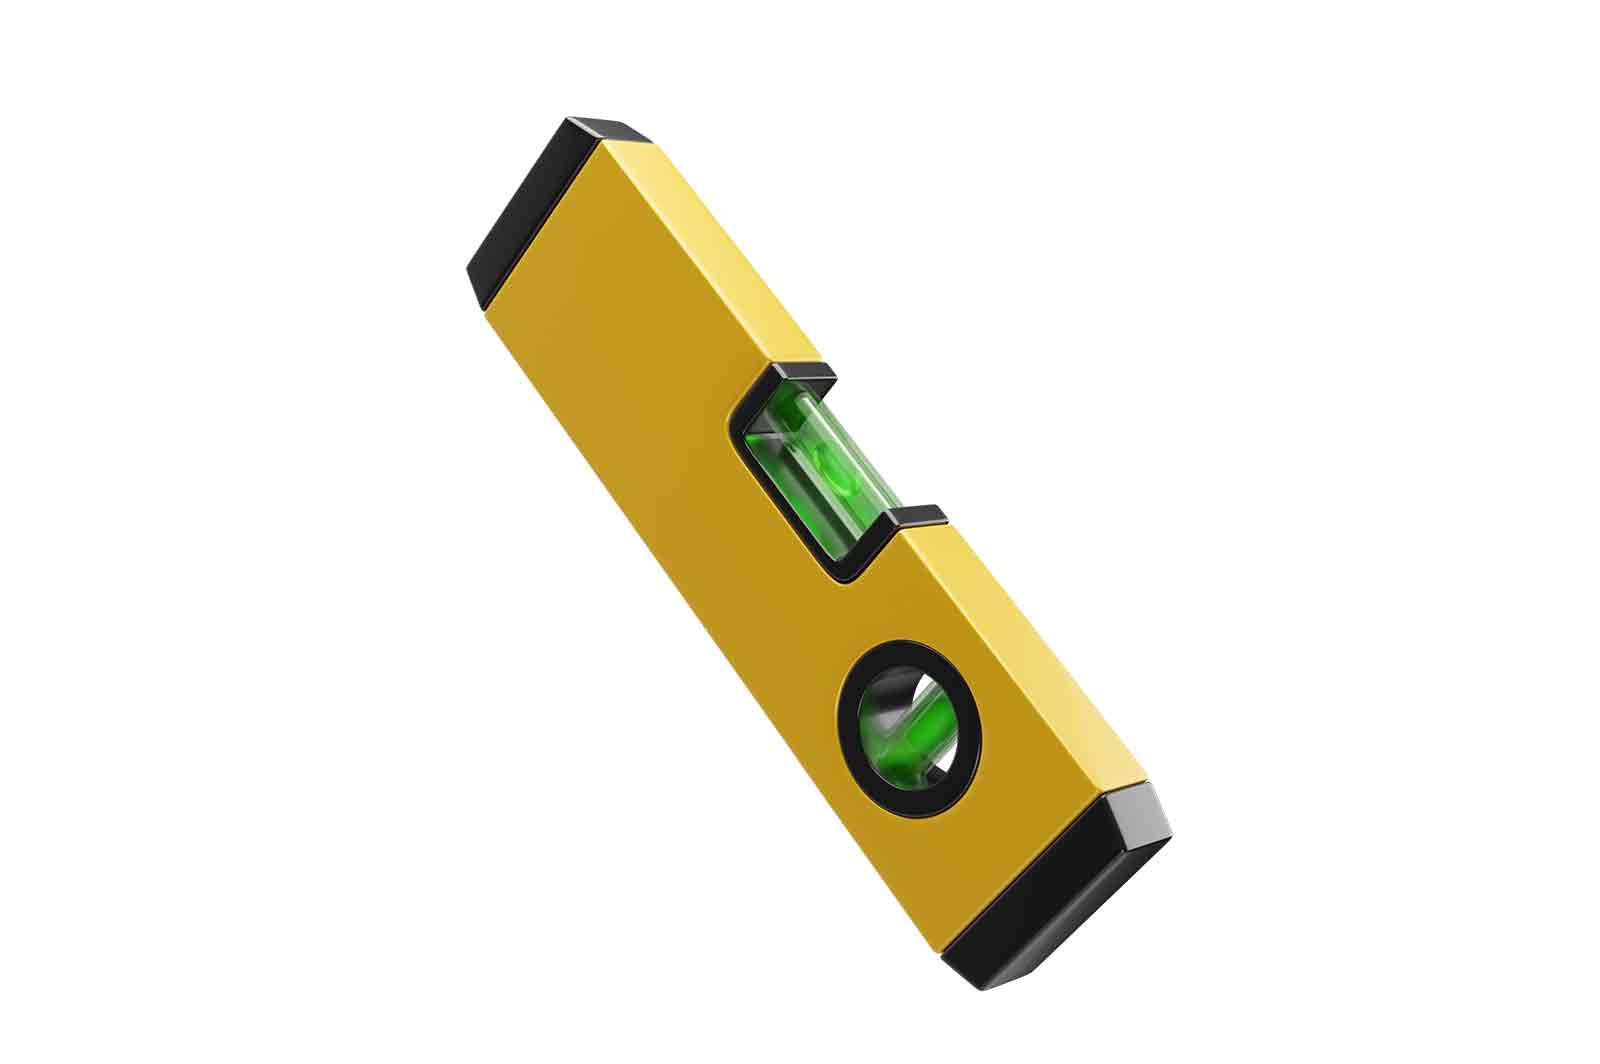 Yellow spirit level with green bubbles, 3d rendered illustration. A device used for determining whether a surface is horizontal or vertical.